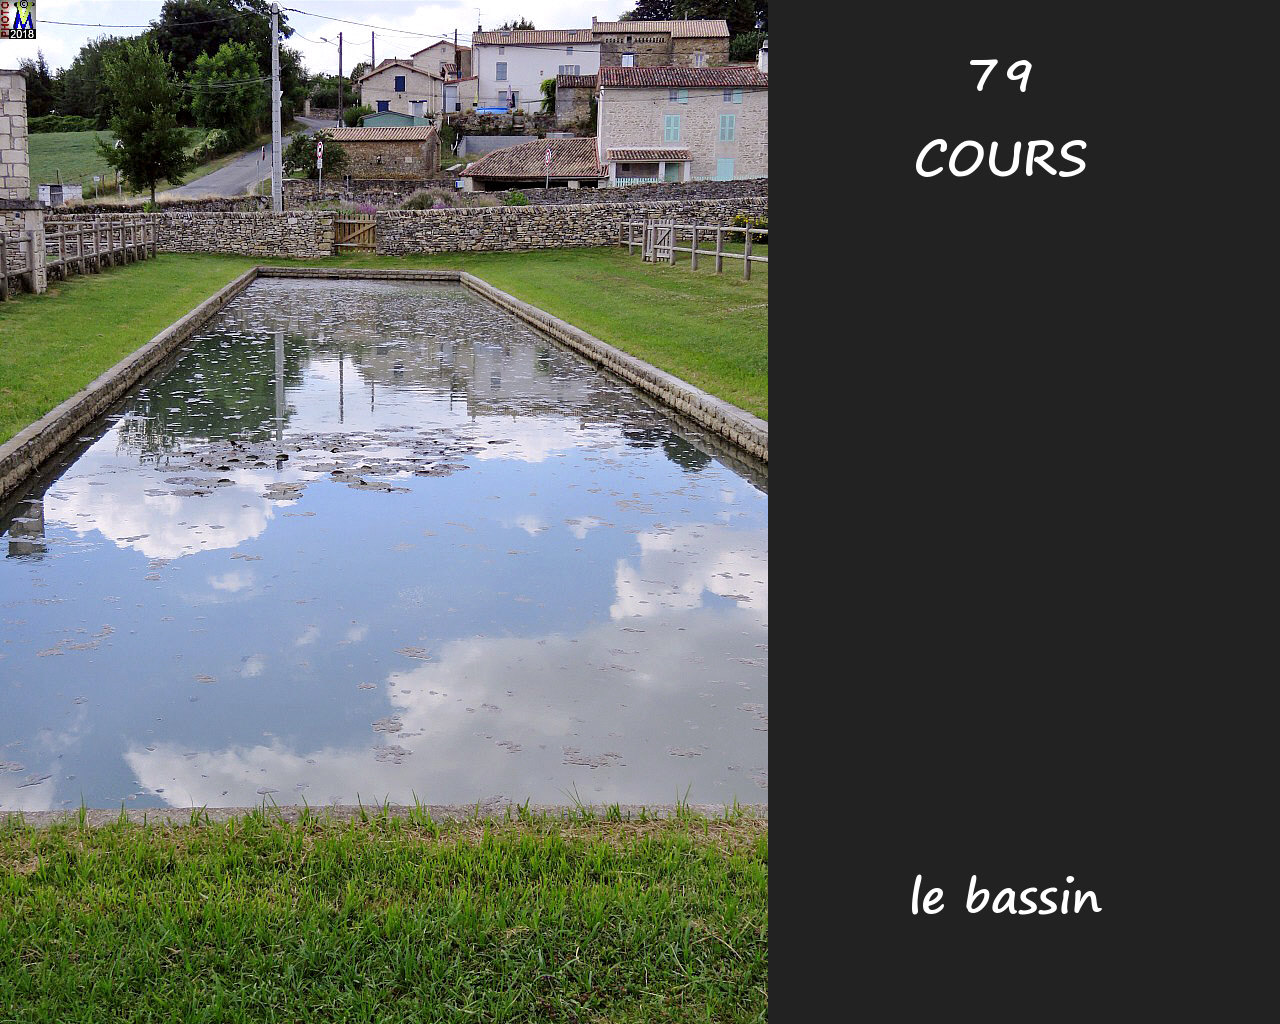 79COURS_bassin_1002.jpg